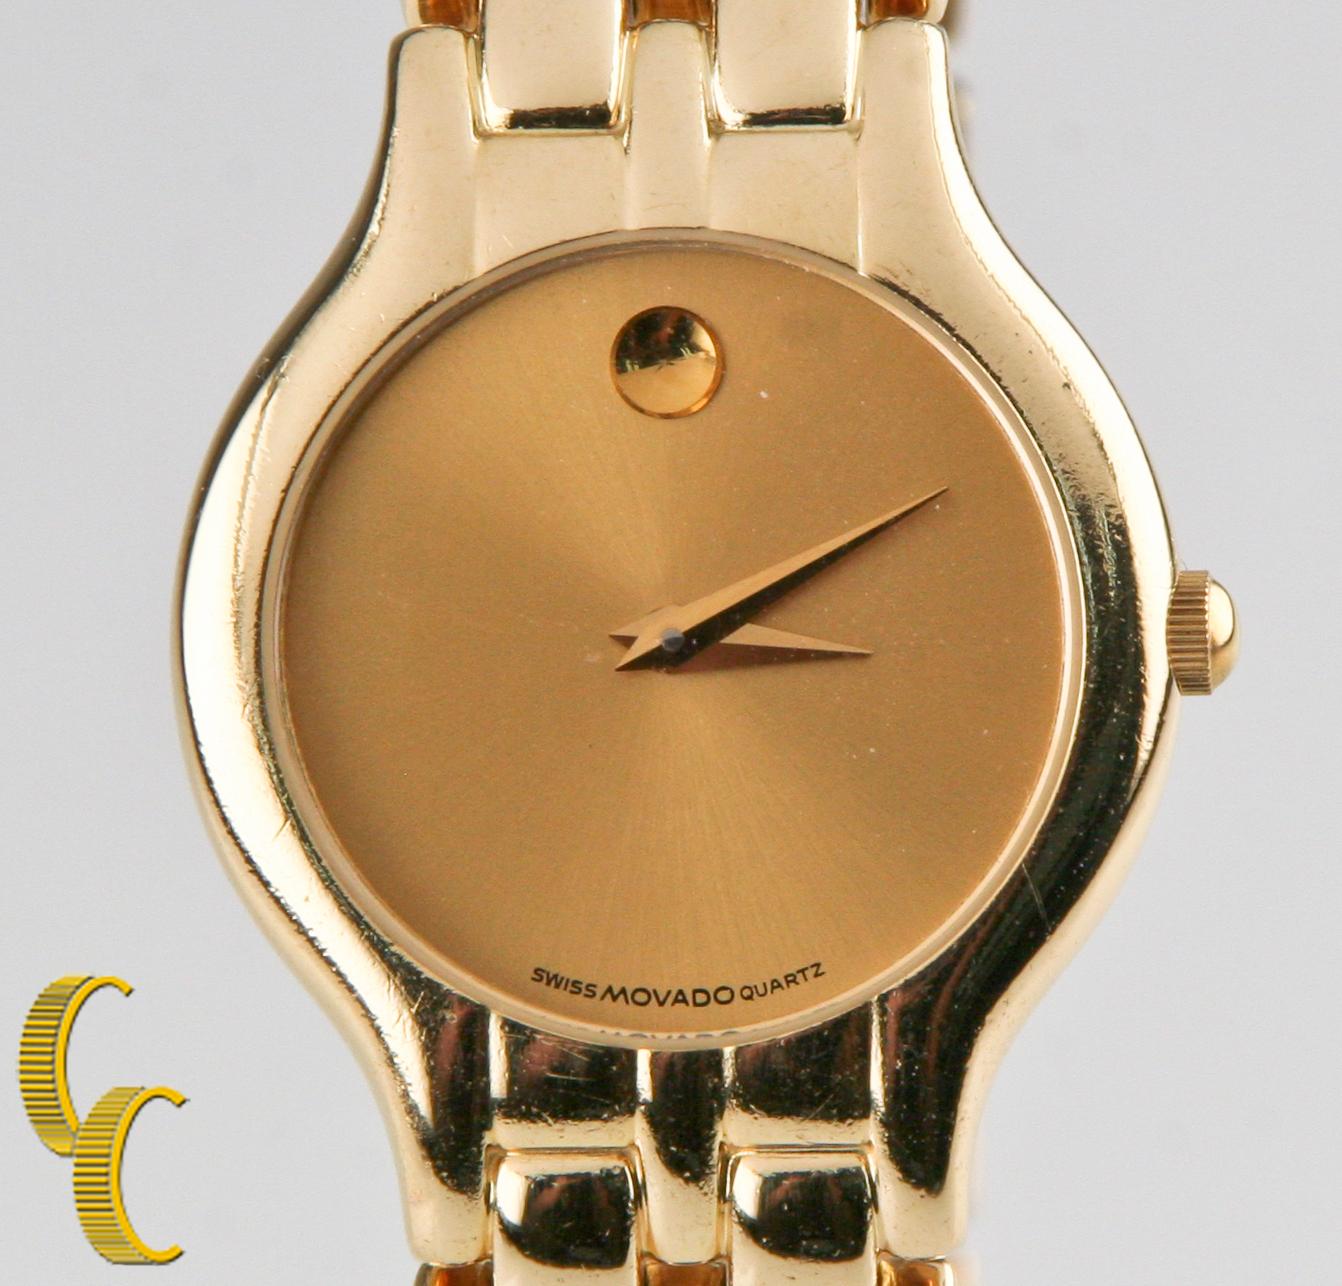 Model #40-25-824
Serial #107347
18k Yellow Gold Case
24 mm in Diameter (26 mm w/ Crown)
Lug-to-Lug Distance = 30 mm
Lug-to-Lug Width = 9 mm
Thickness = 4 mm
Gold Museum Dial w/ Gold Hands (M + H)
Labeled 